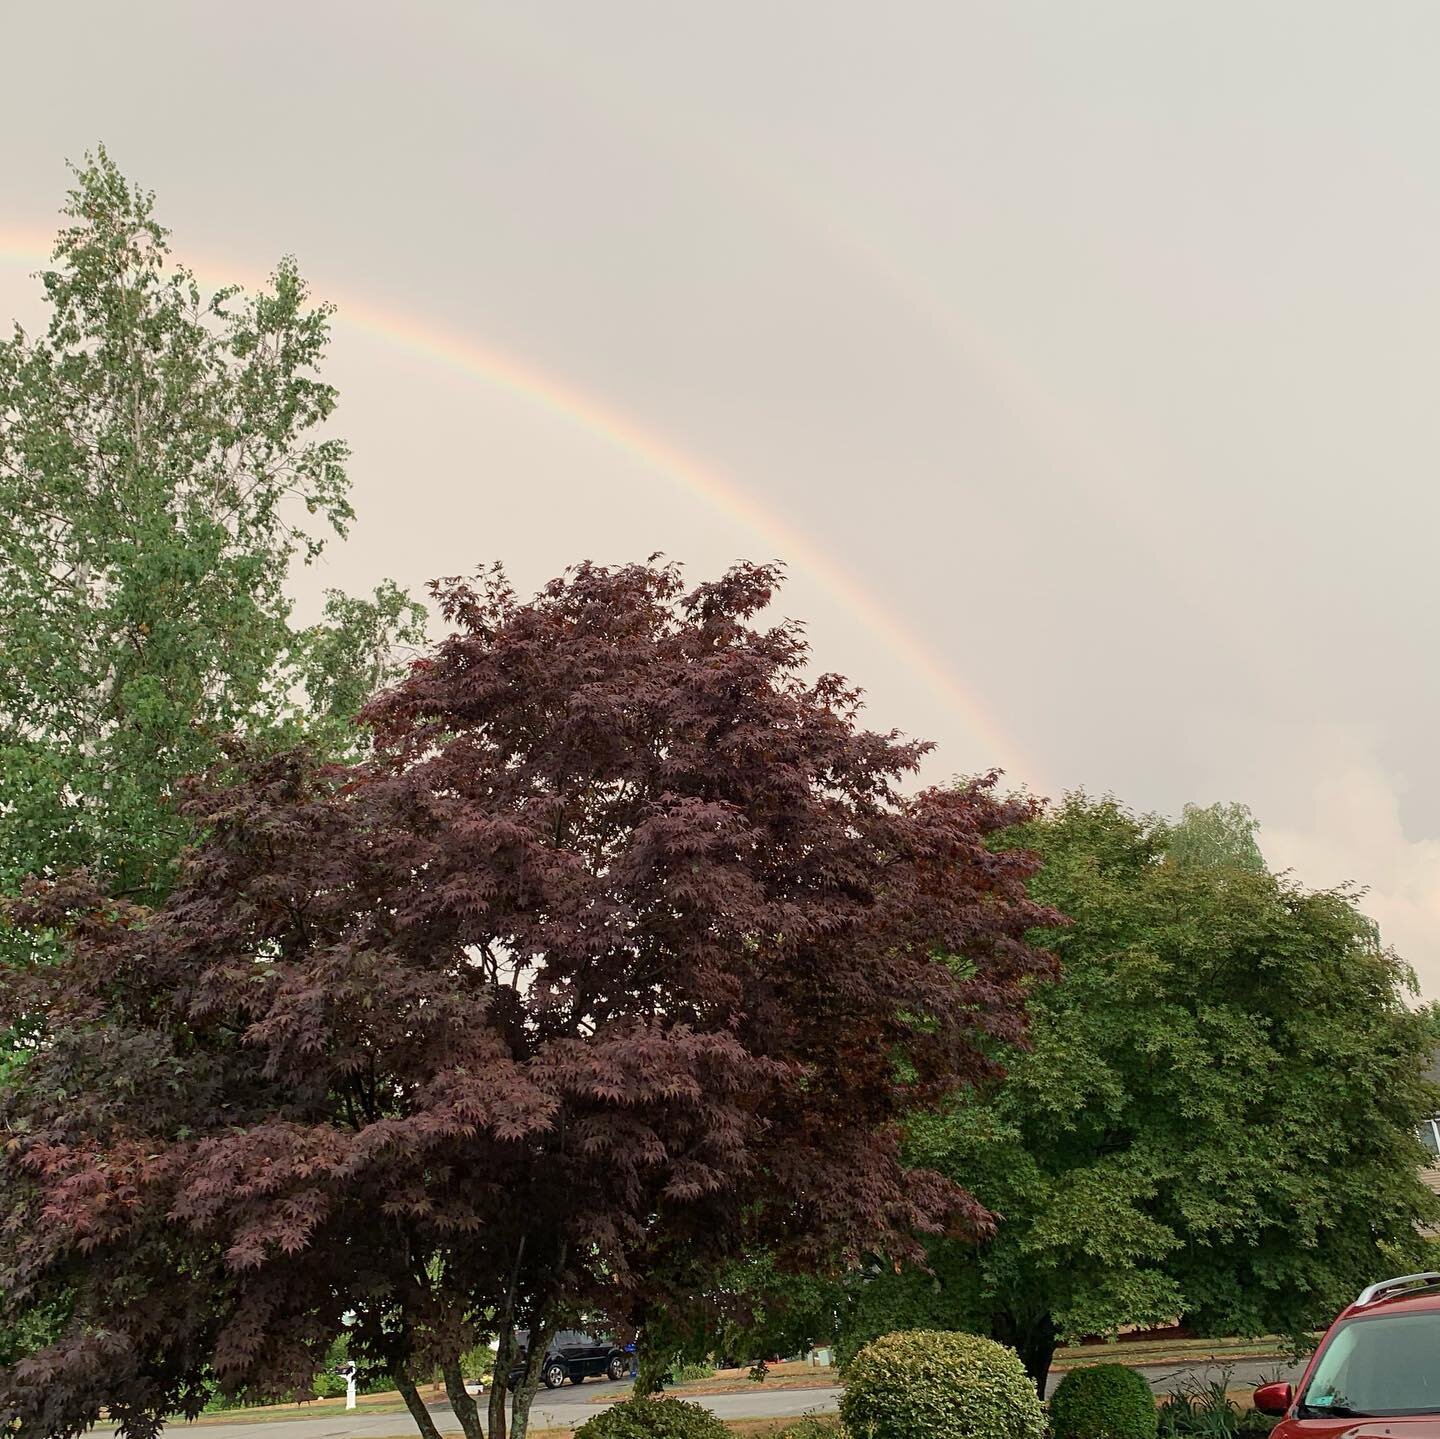 Love the double rainbows! Always a blessing to see!